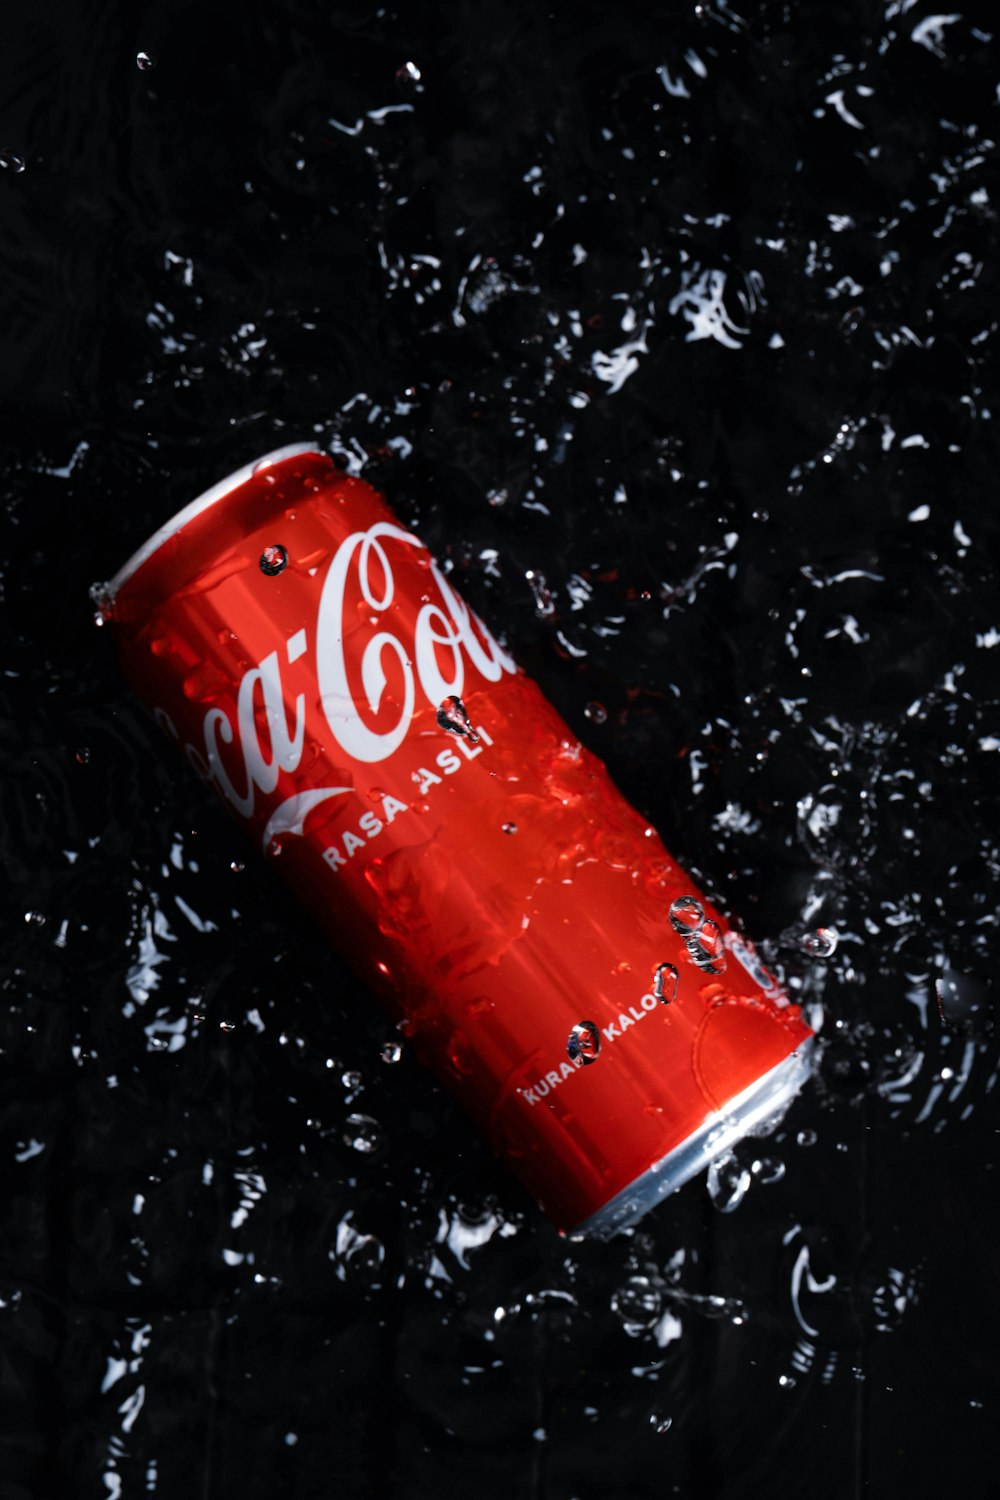 a can of coca - cola in the water